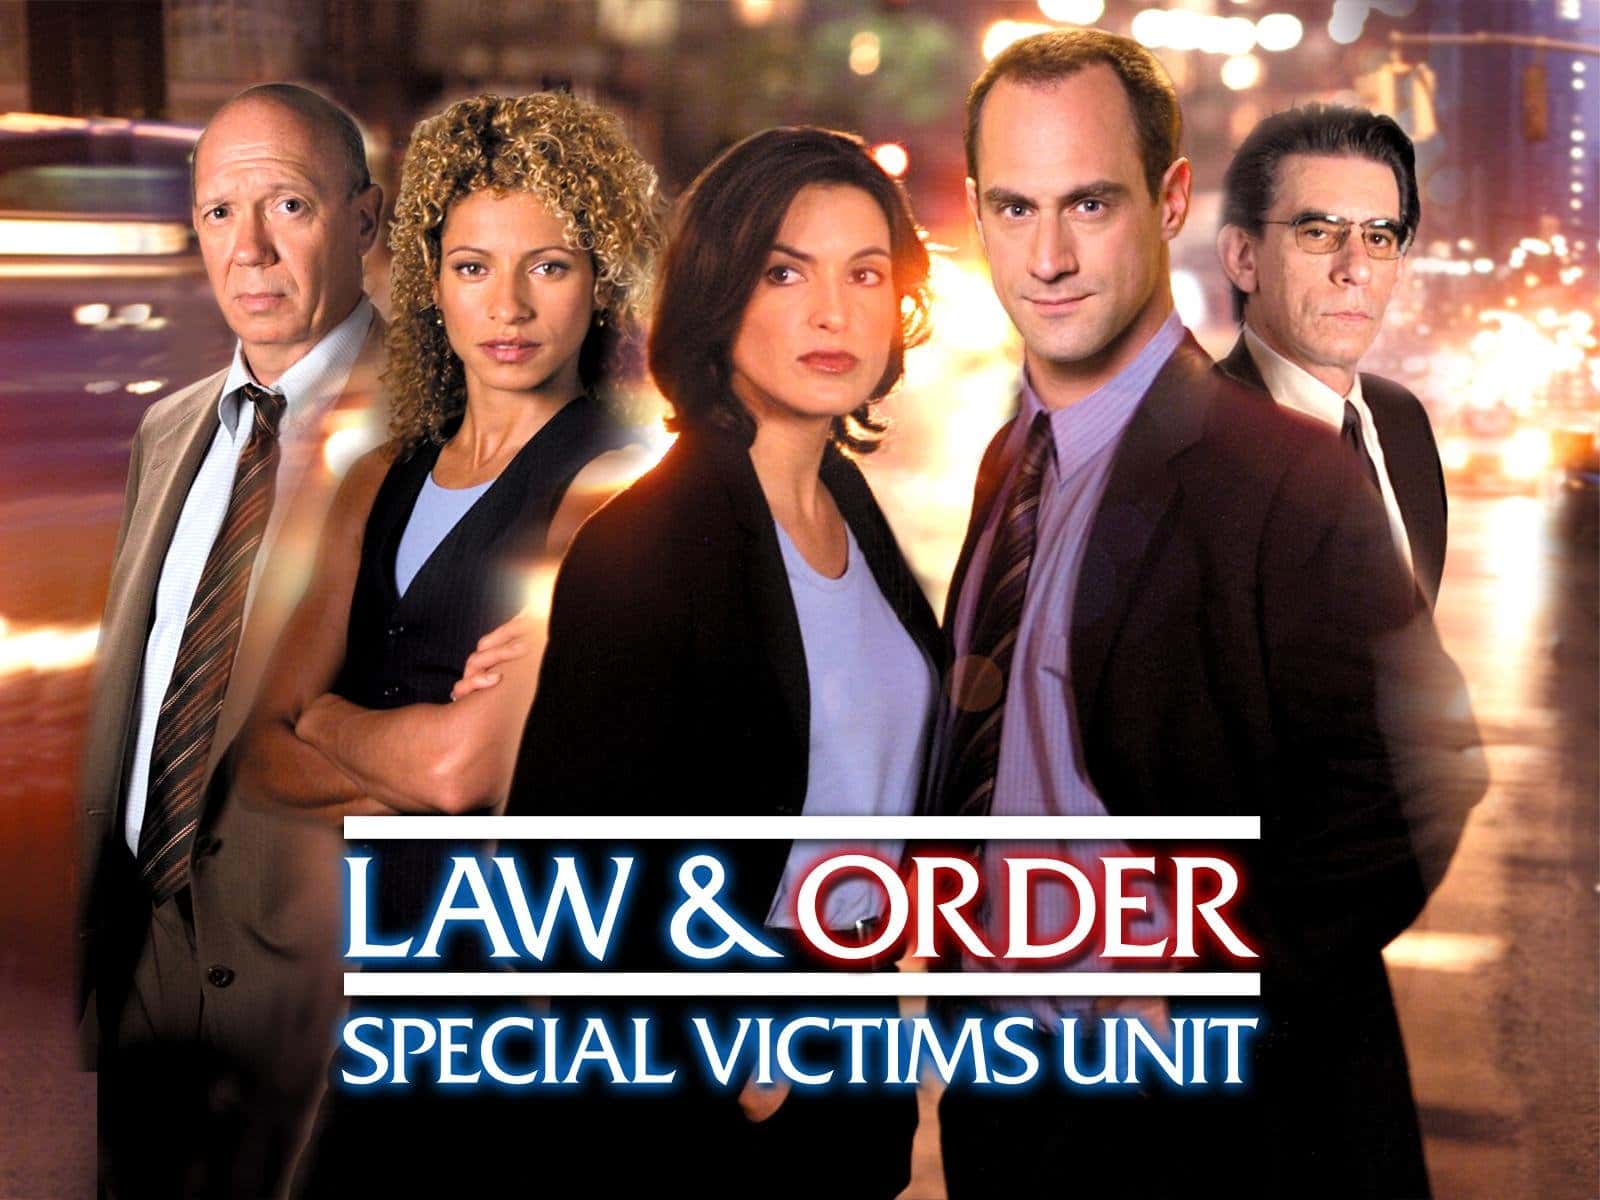 law and order new episodes